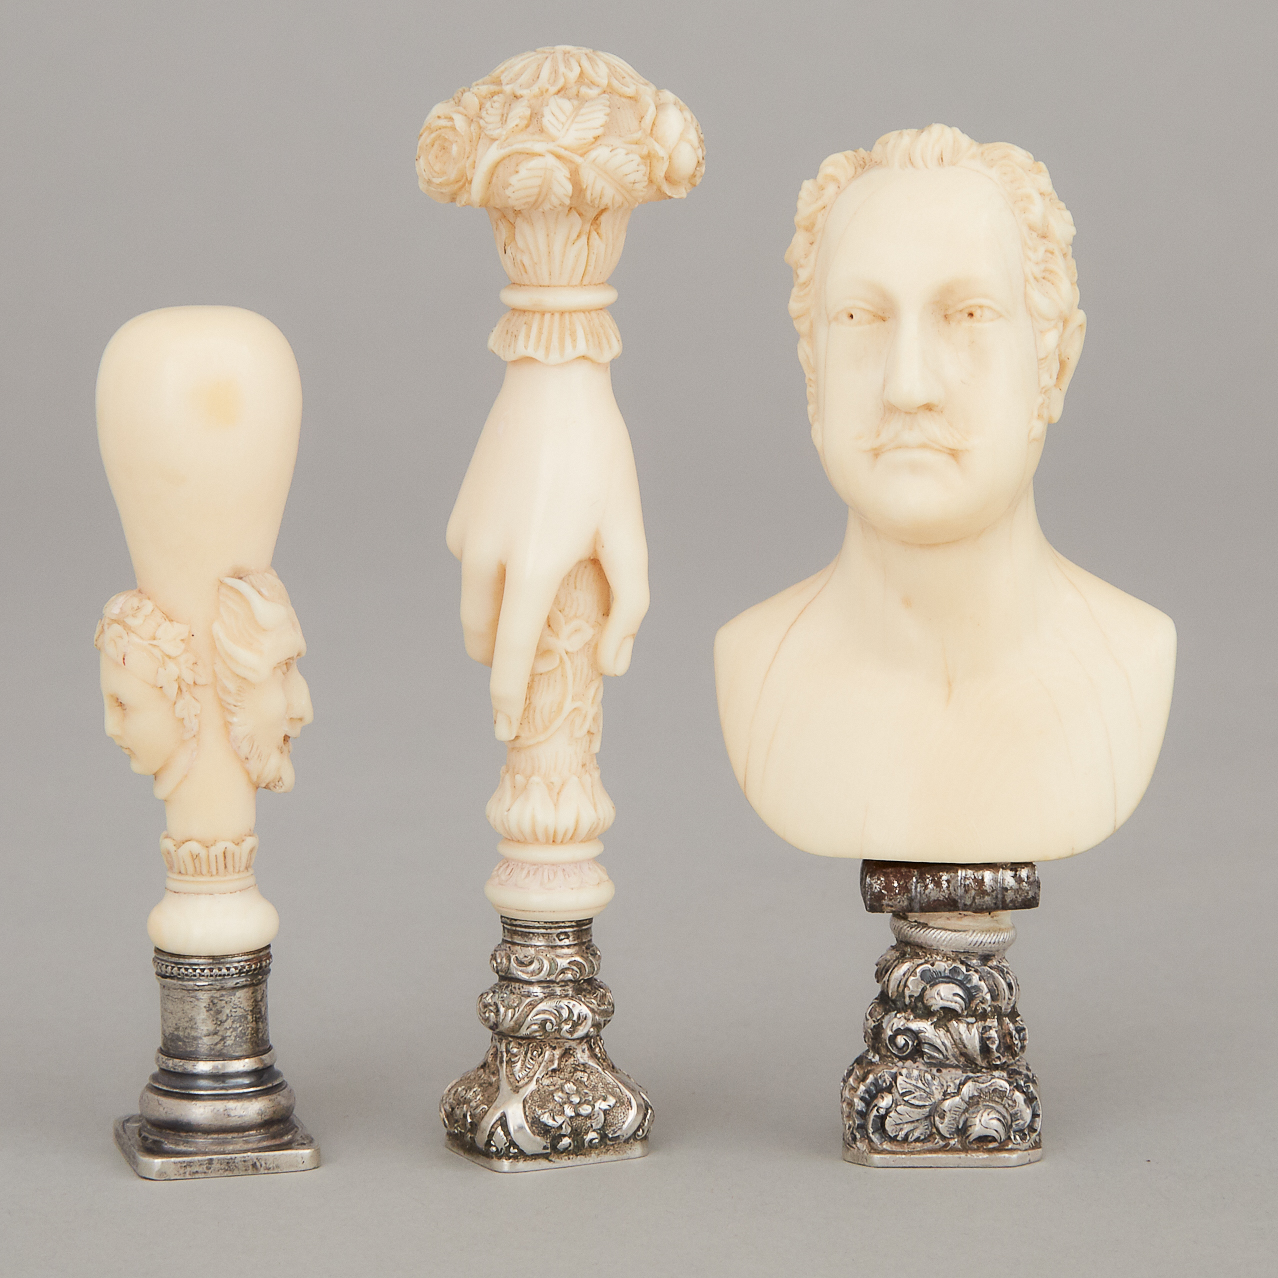 Three Victorian Silver Mounted Ivory Desk Seals, mid 19th century